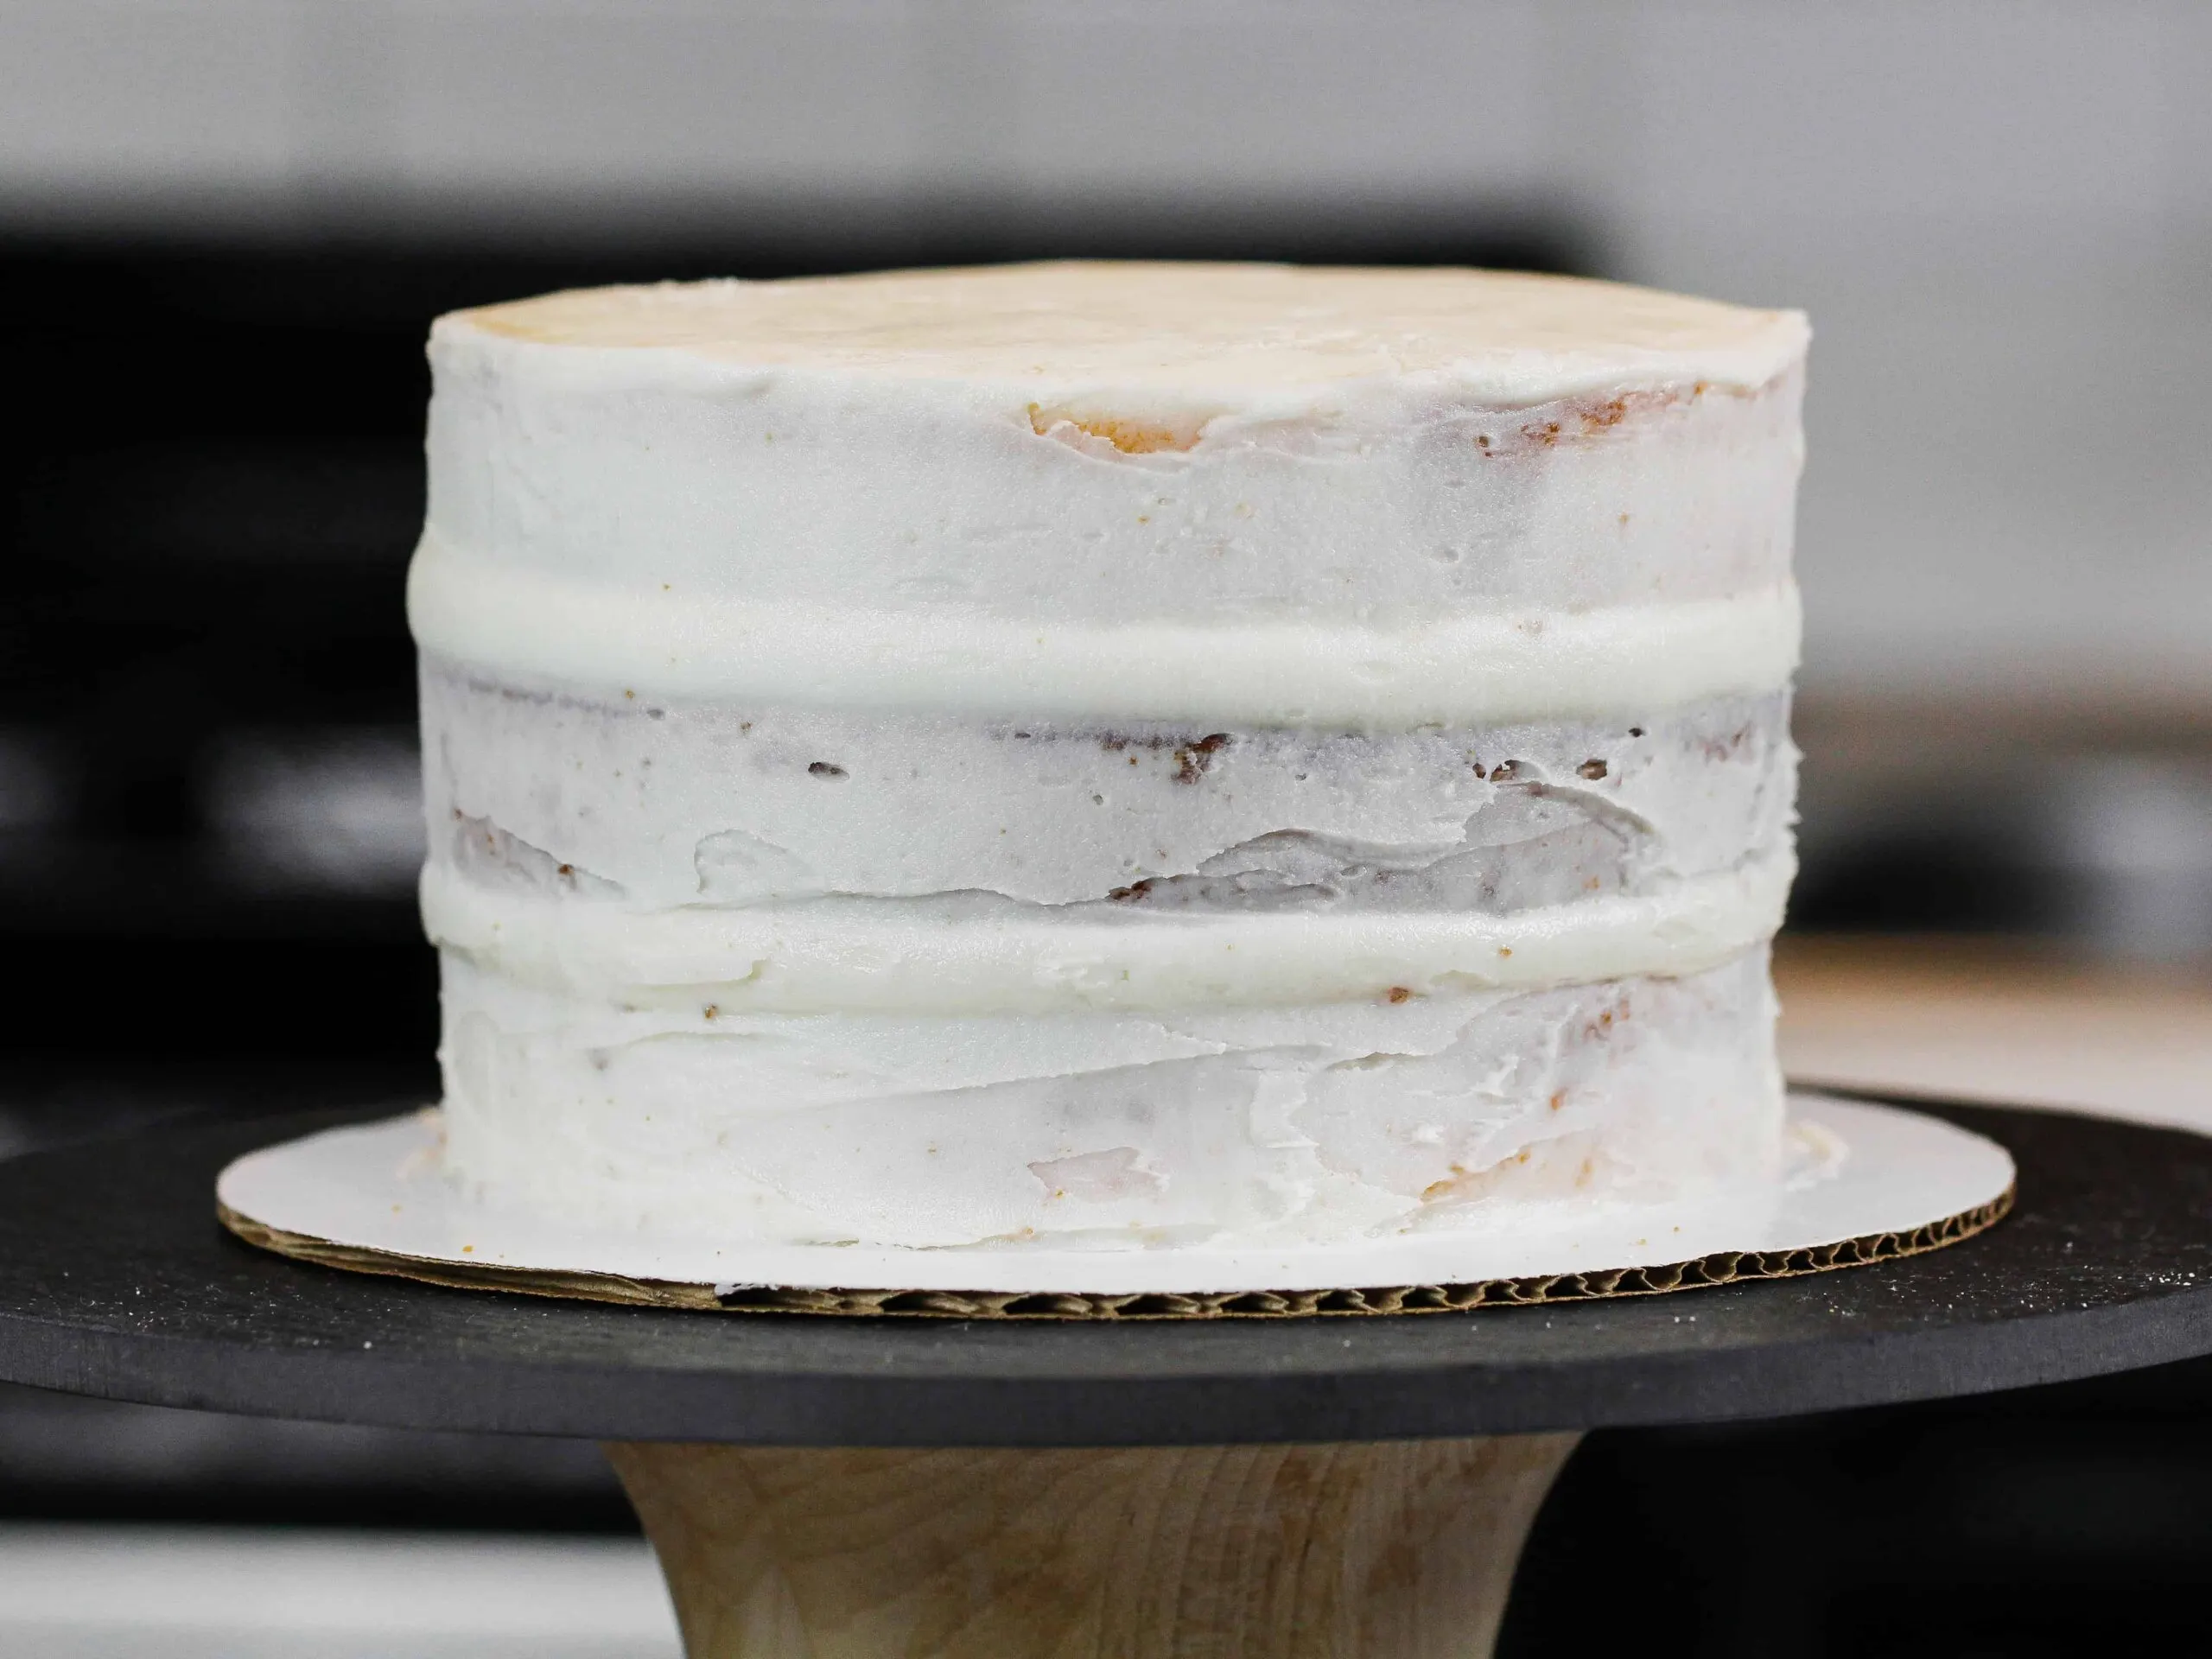 image of a layer cake with bulging sides, because air bubbles were trapped inside the frosting and as the cake settled the air pressed the frosting out.